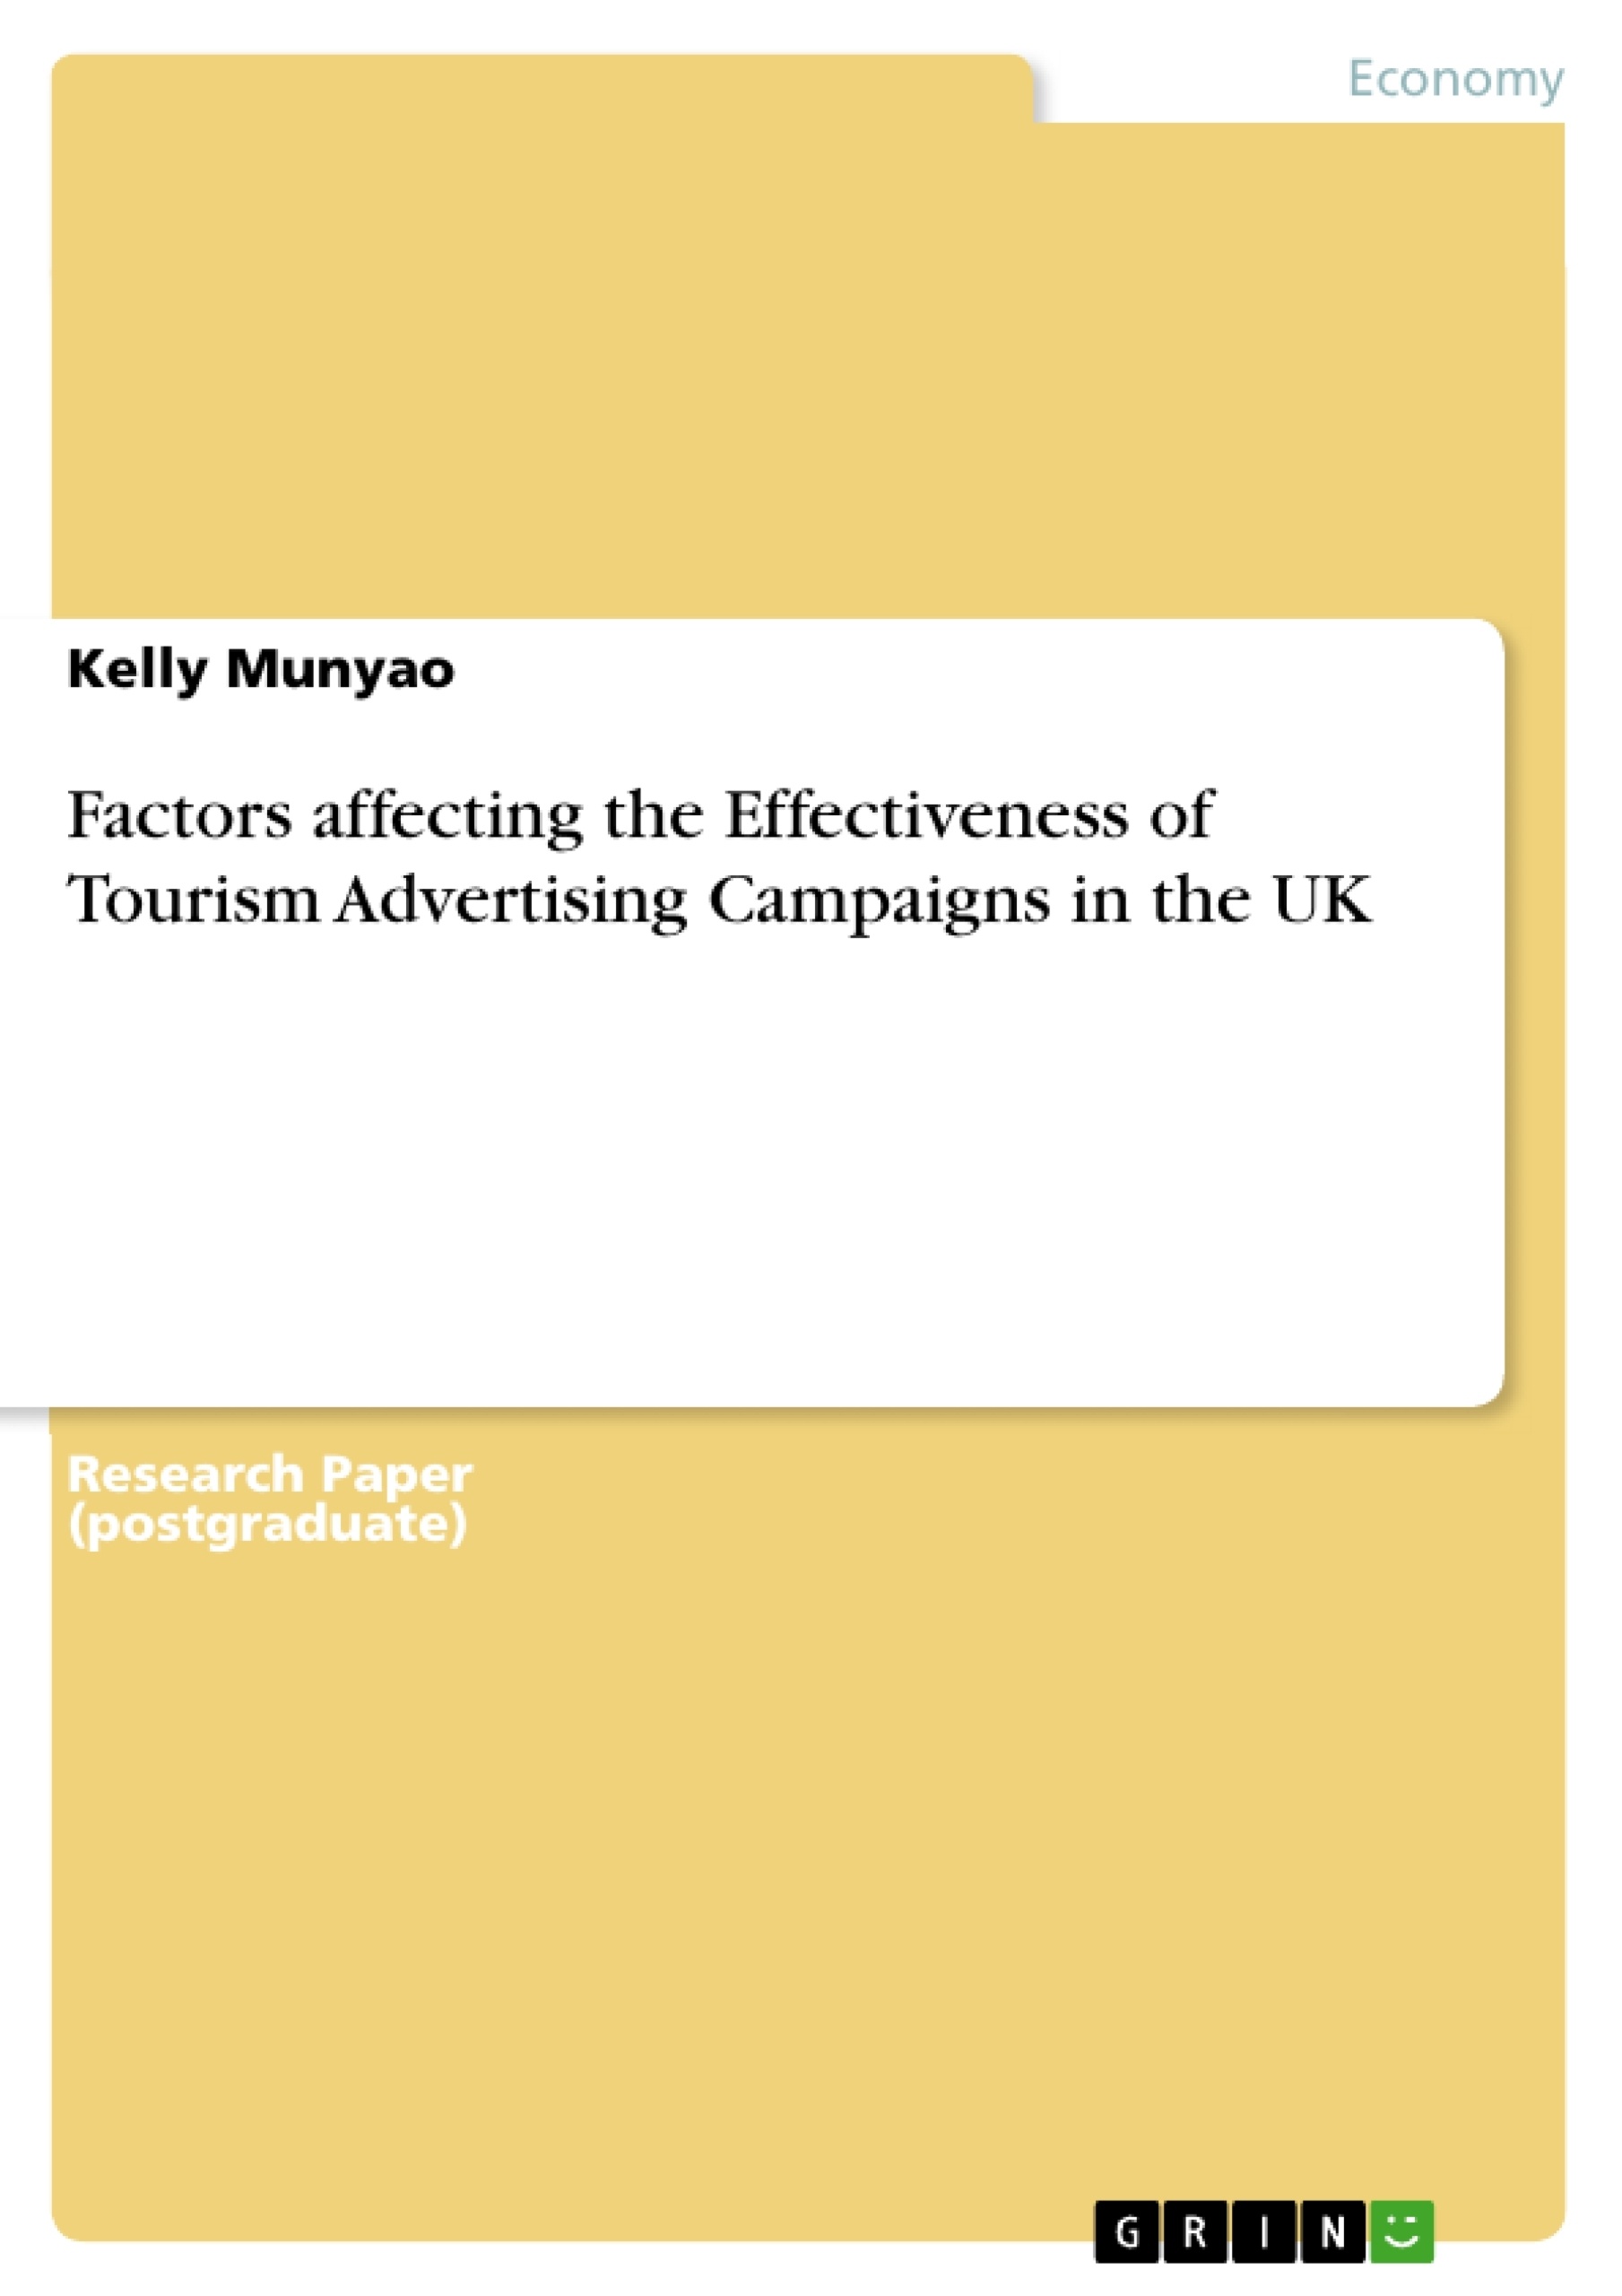 Titel: Factors affecting the Effectiveness of Tourism Advertising Campaigns in the UK